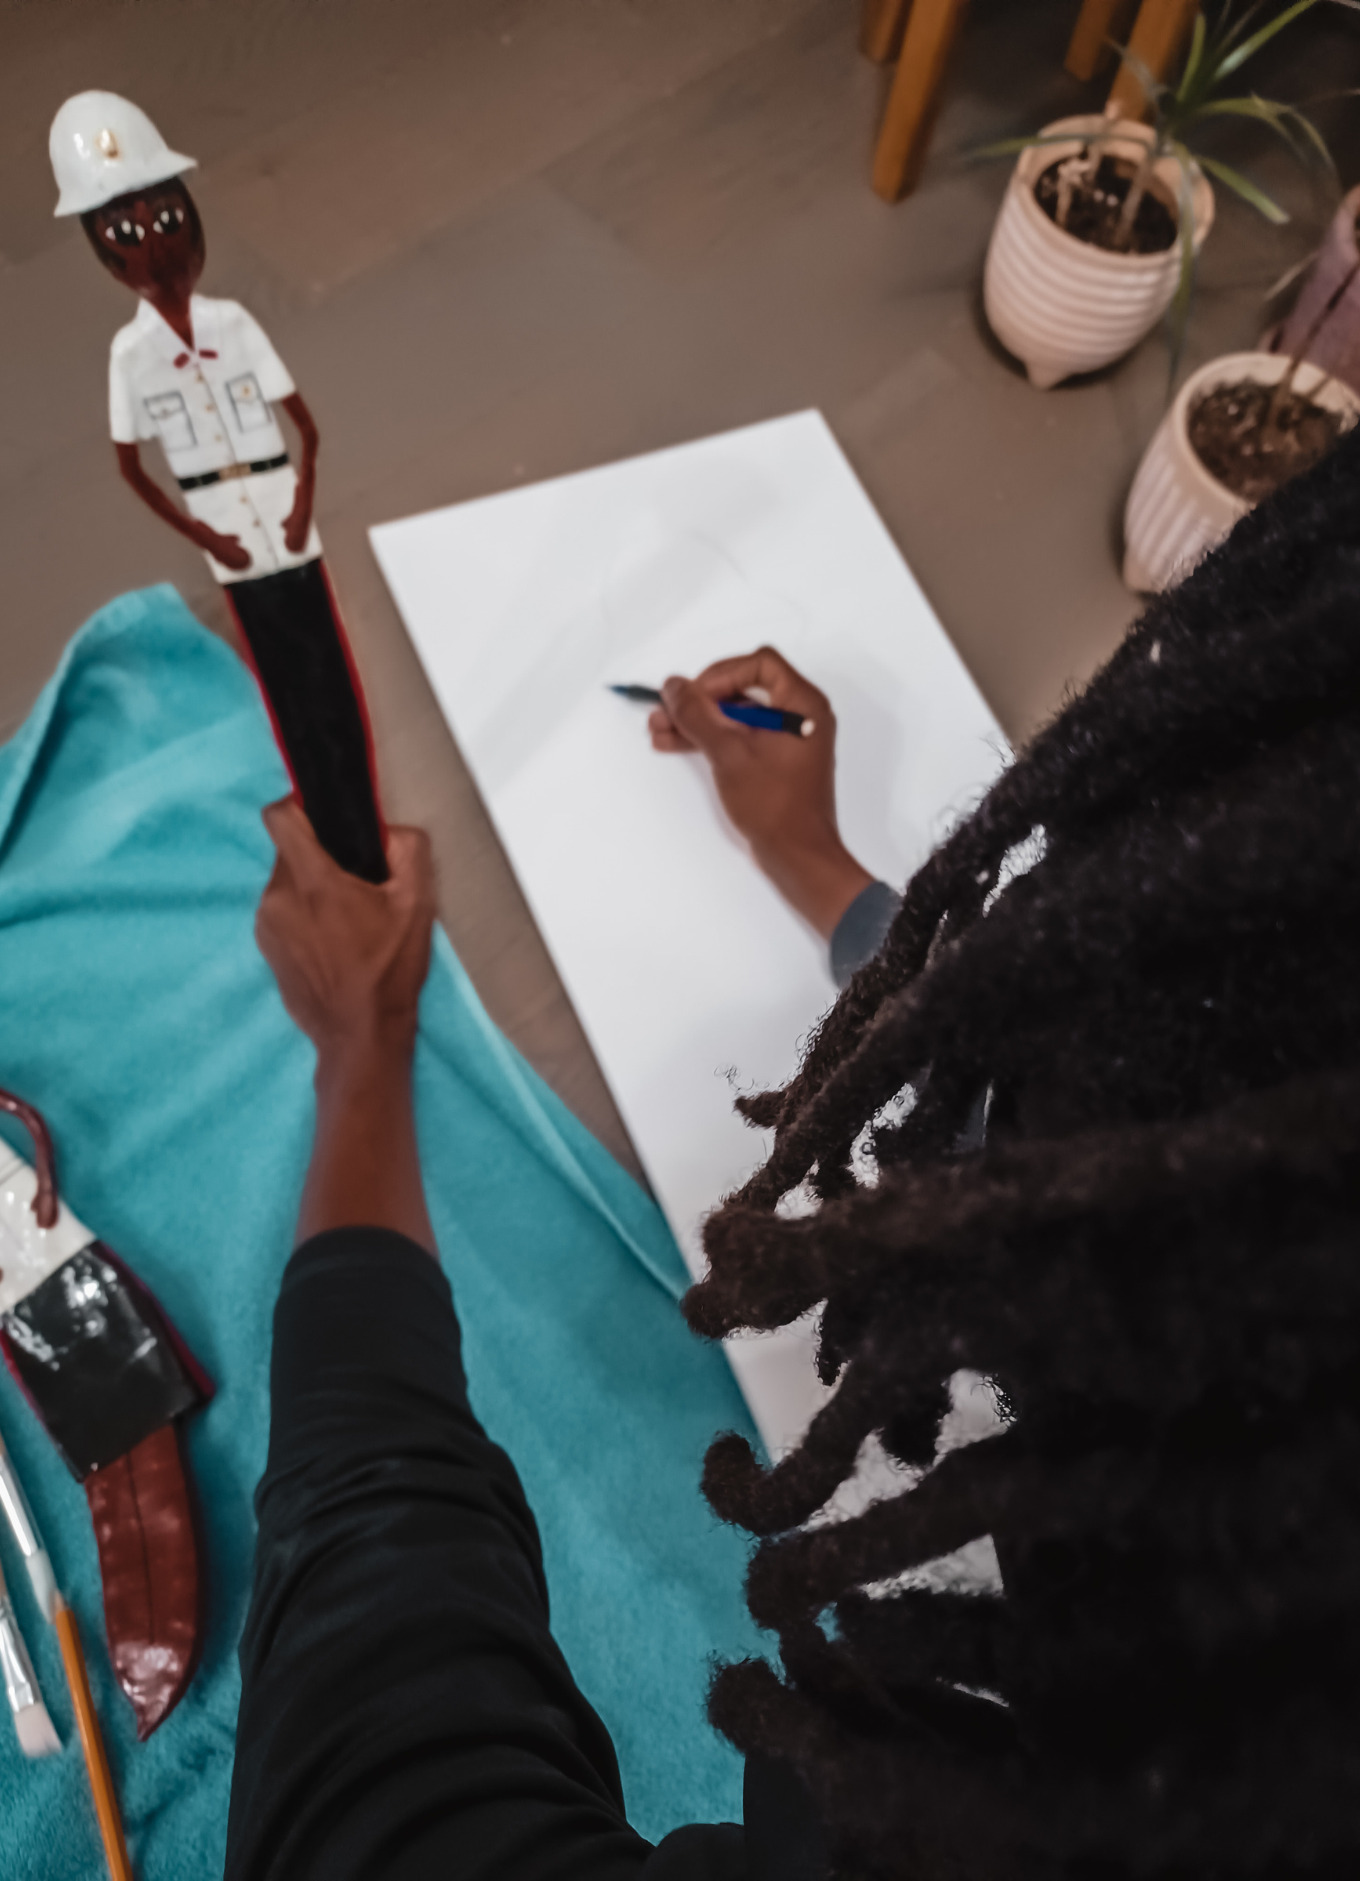 Oh Brother! My brother, Rashad helps recreate some Bahamian police officer dolls on canvas.